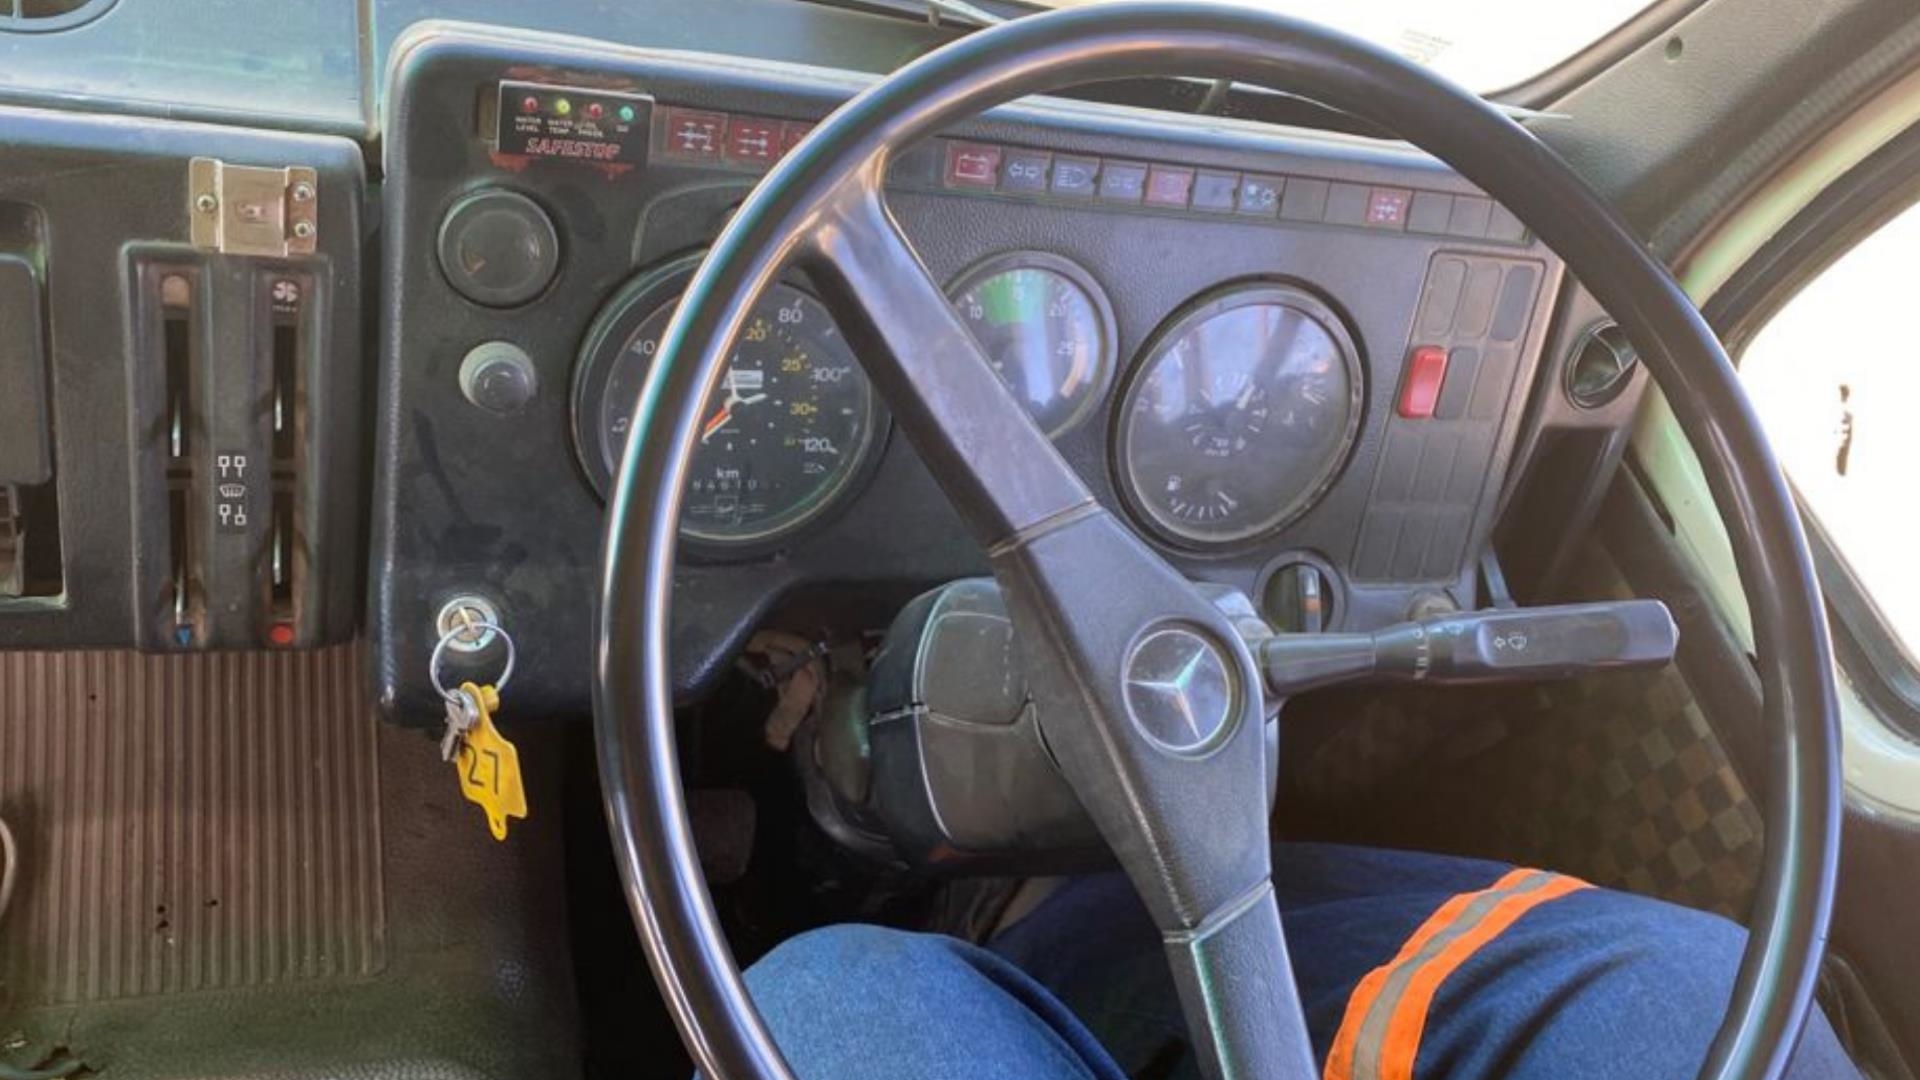 Mercedes Benz Truck tractors 1987 Mercedes Benz V Series 1987 for sale by Truck and Plant Connection | Truck & Trailer Marketplaces